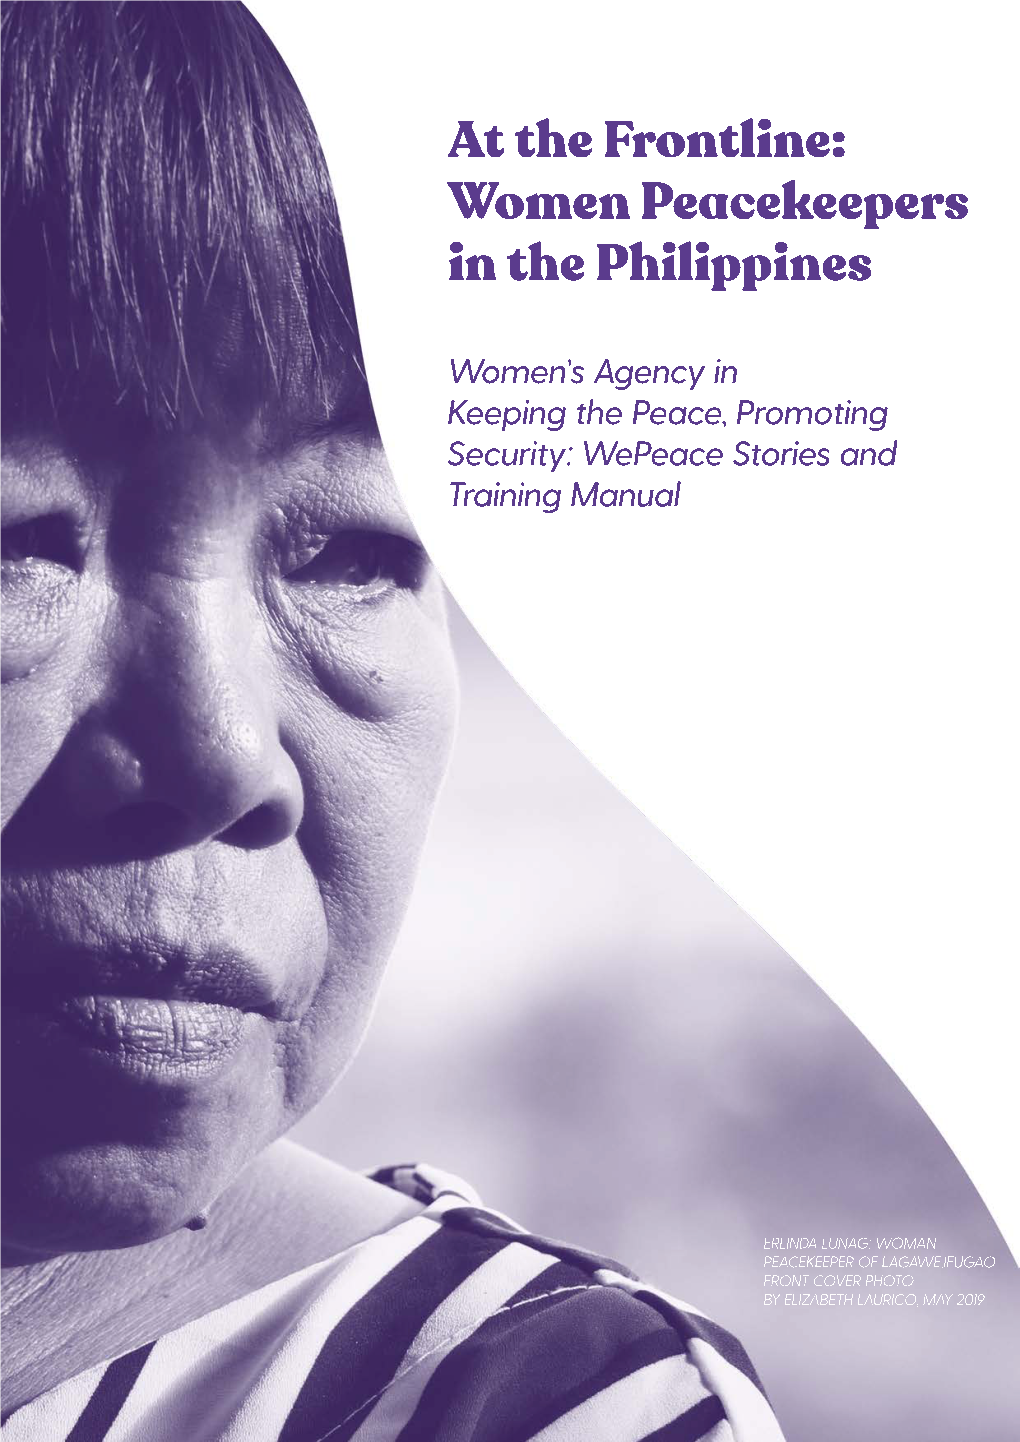 At the Frontline: Women Peacekeepers in the Philippines